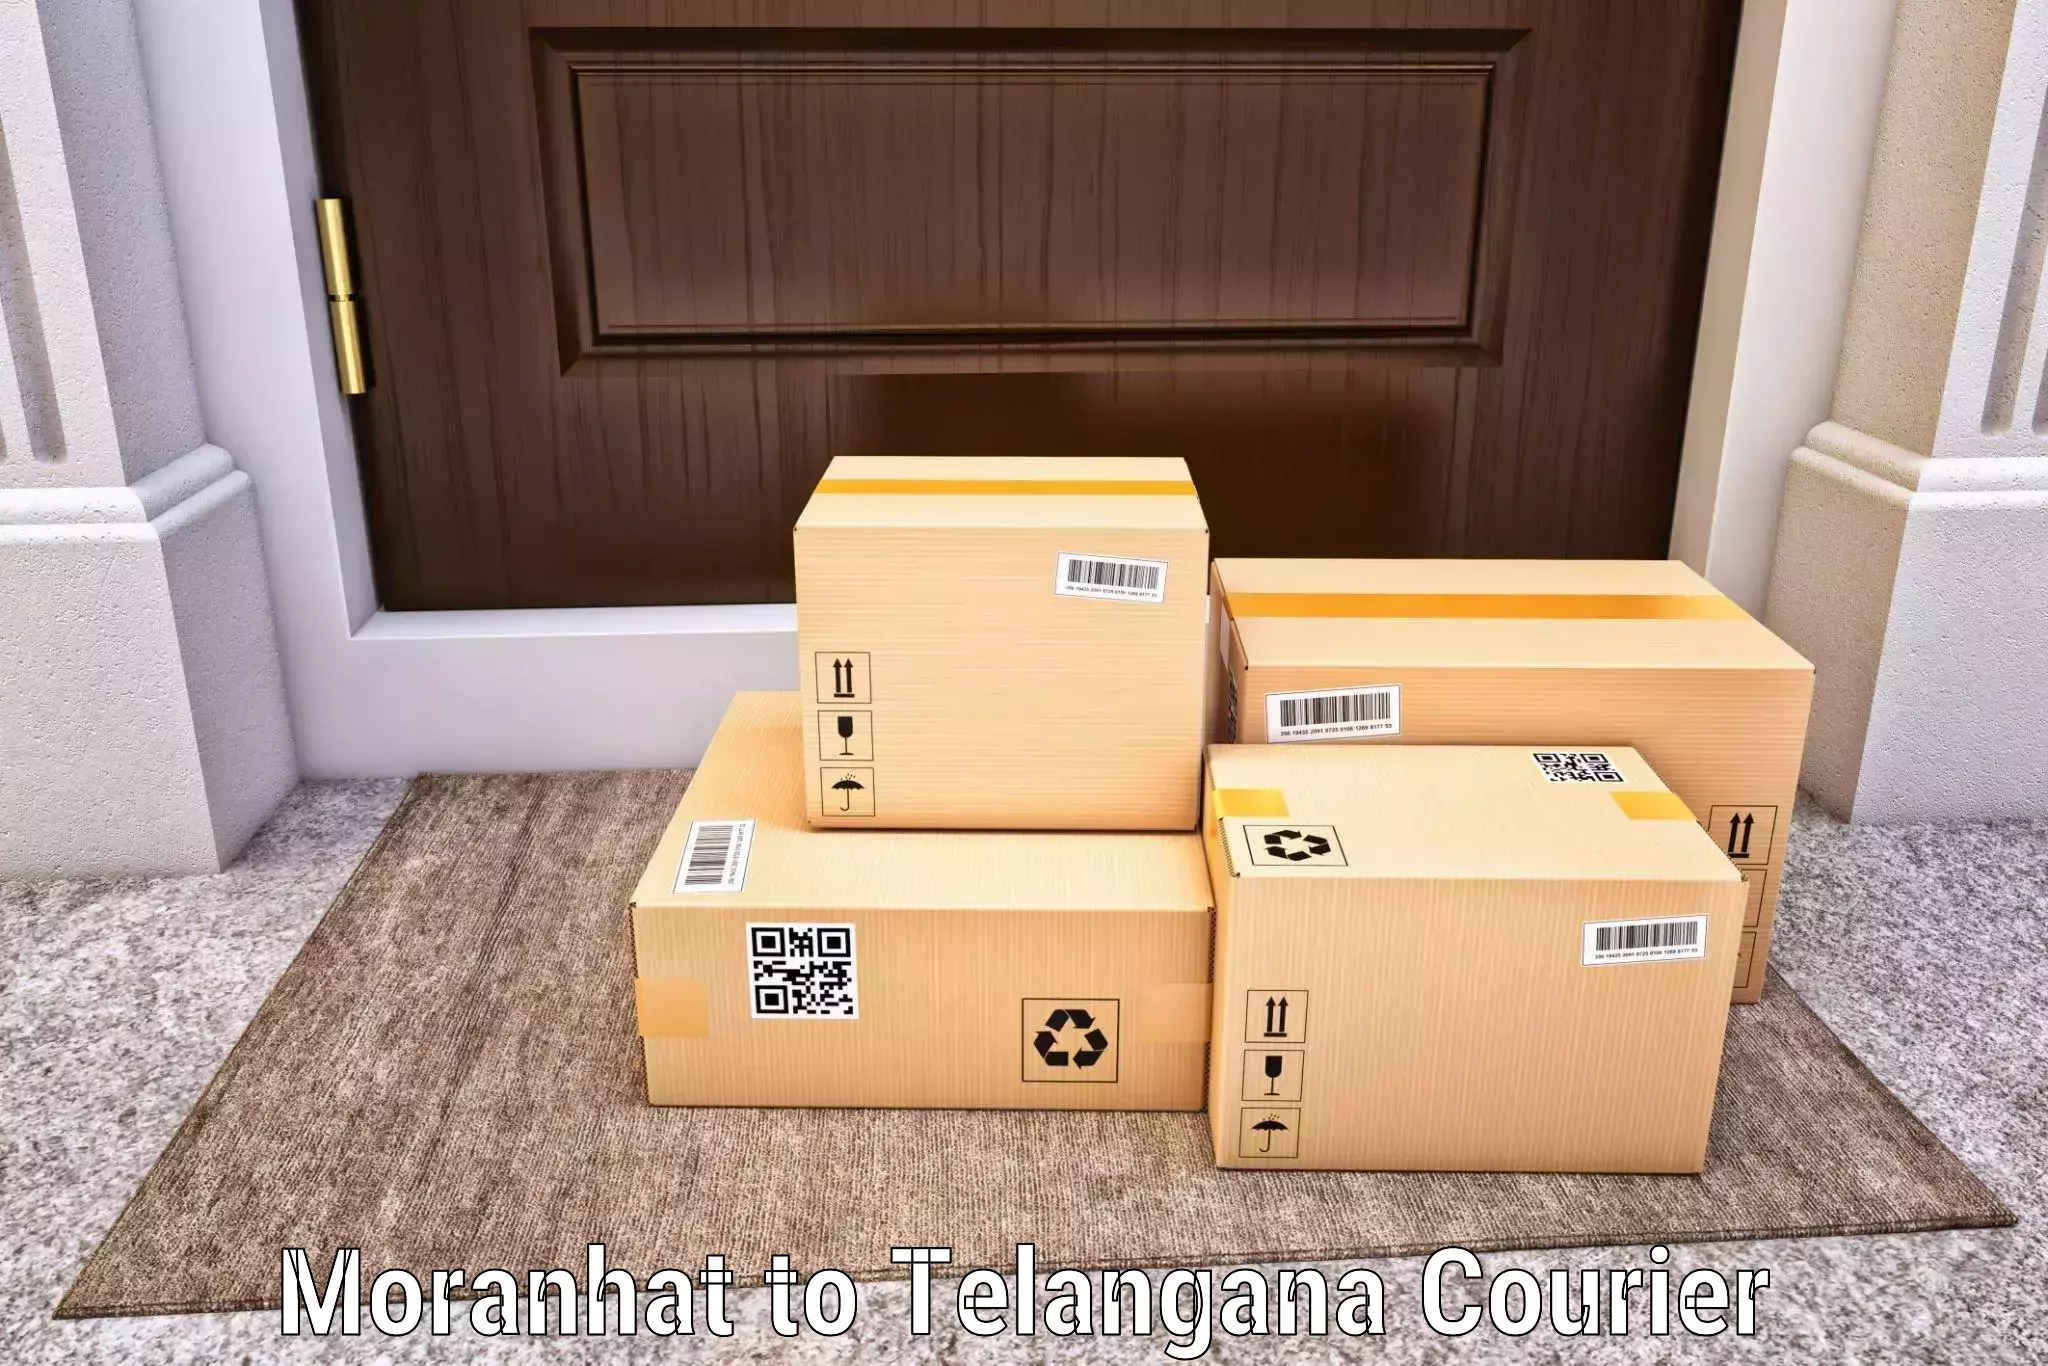 International courier rates Moranhat to Gollapalli